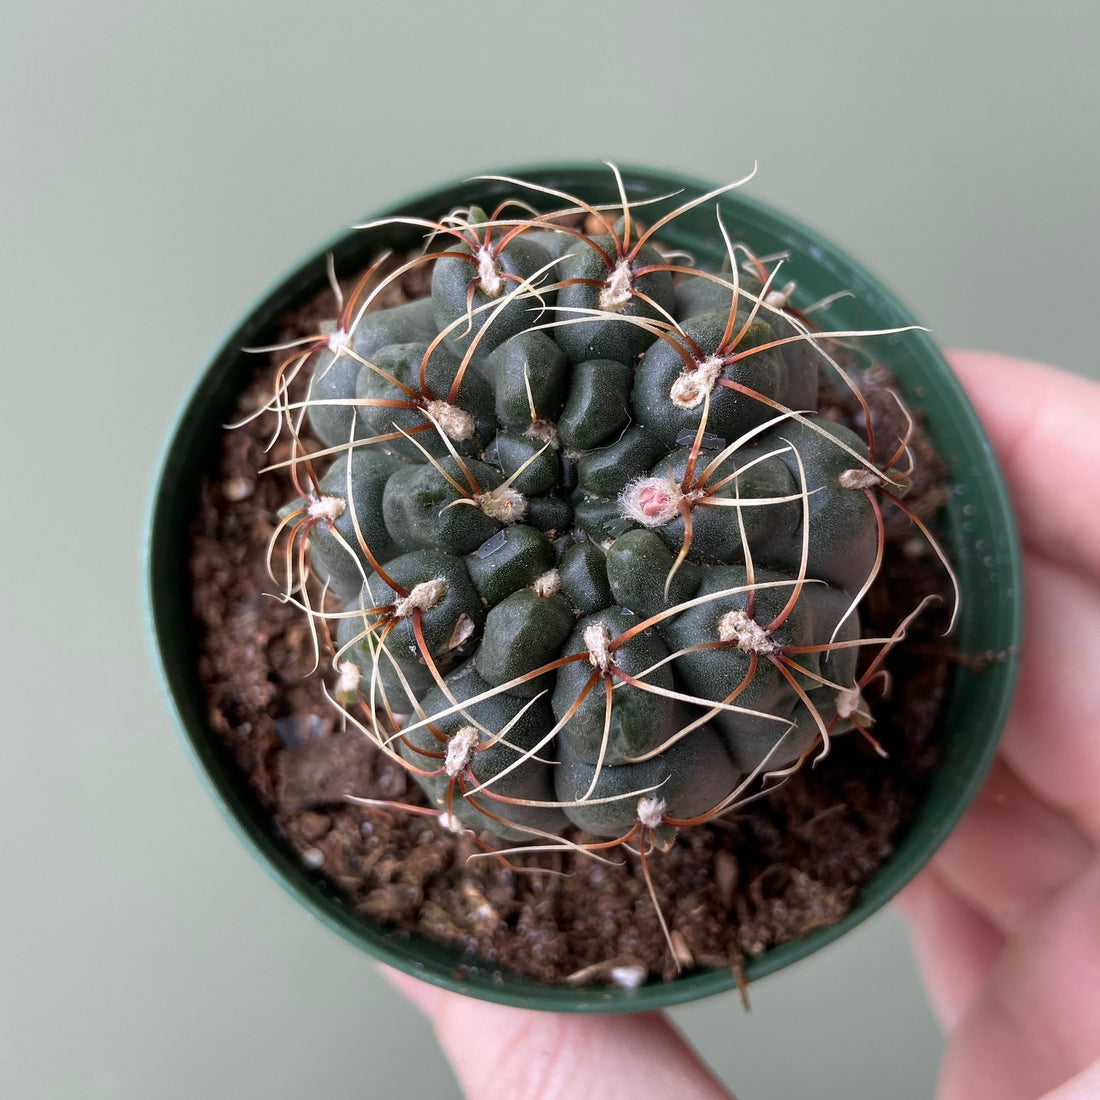 What to do if you bring home a cactus or succulent that is *not* from us